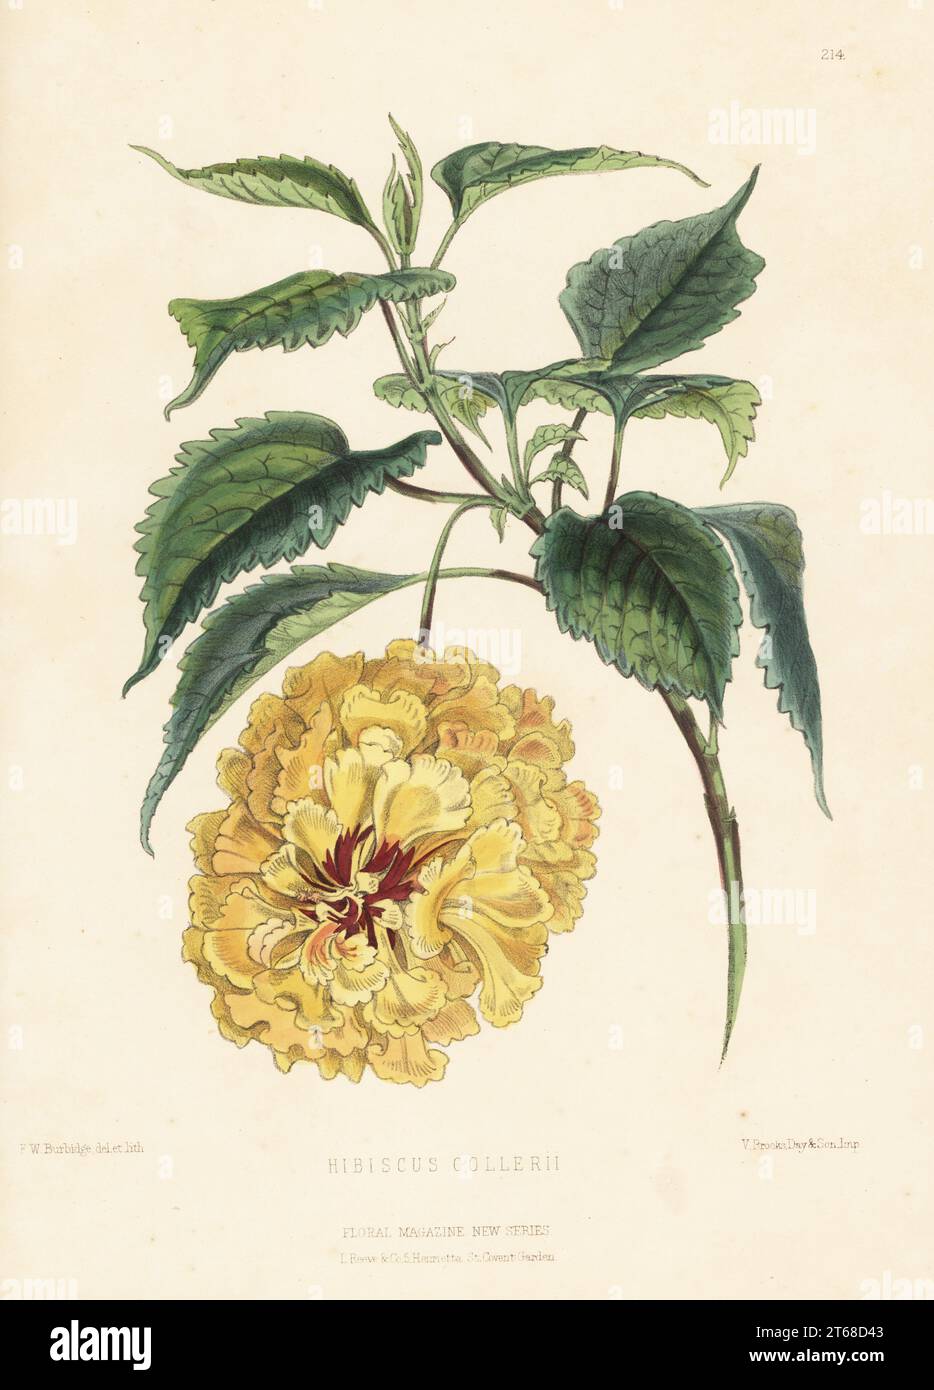 China rose, Hibiscus collerii, Hibiscus rosa-sinensis. Introduced by William Bull, Chelsea, from the South Sea Islands. Handcolored botanical illustration drawn and lithographed by Frederick William Burbidge from Henry Honywood Dombrain's Floral Magazine, New Series, Volume 5, L. Reeve, London, 1876. Lithograph printed by Vincent Brooks, Day & Son. Stock Photo